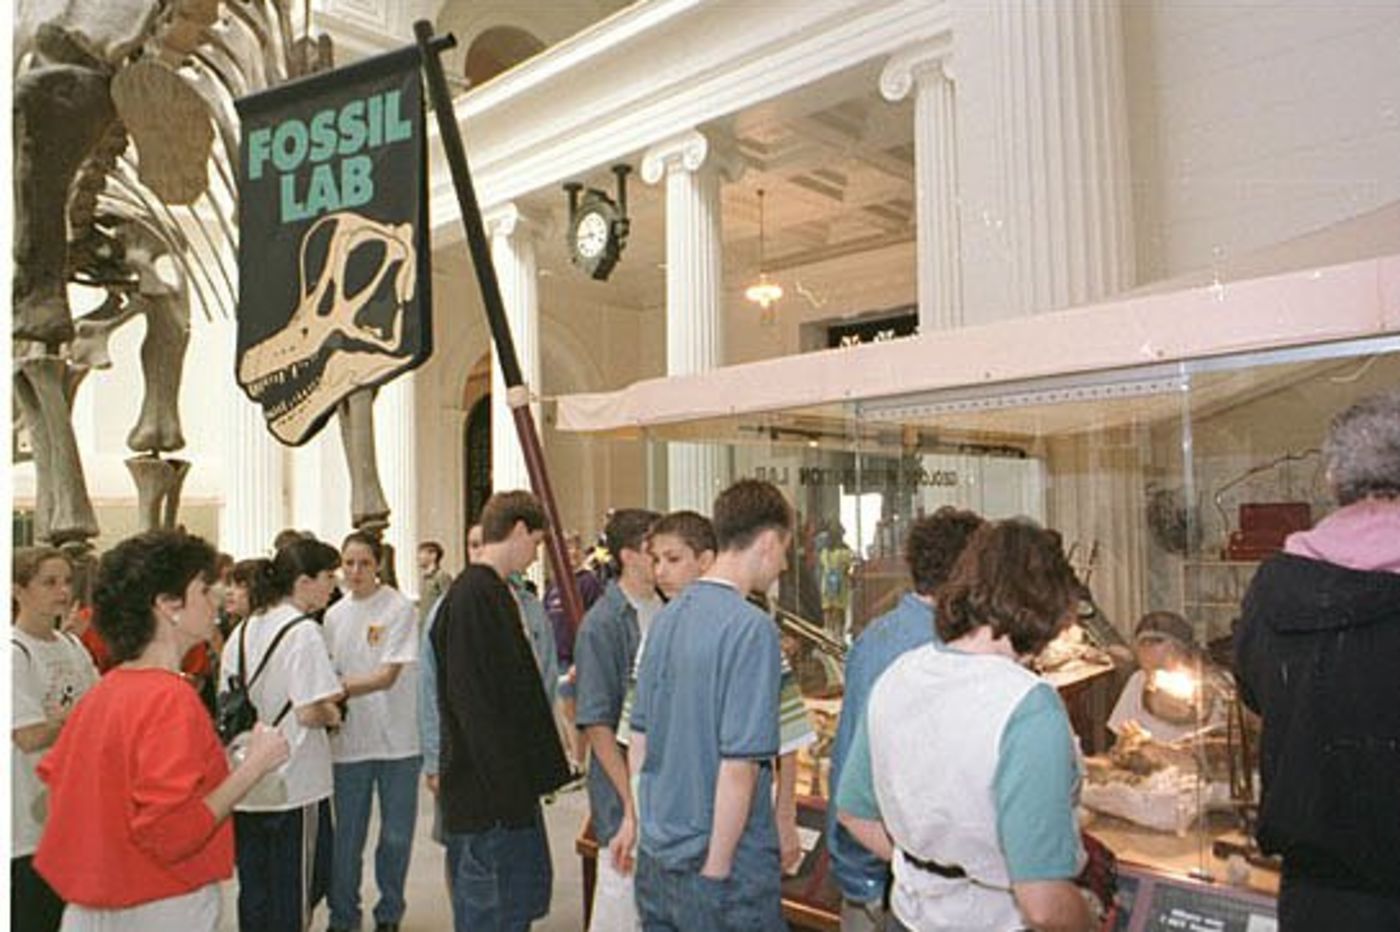 A public viewing lab setup in the Stanley Field Hall with visitors looking over fossil preparators at work.